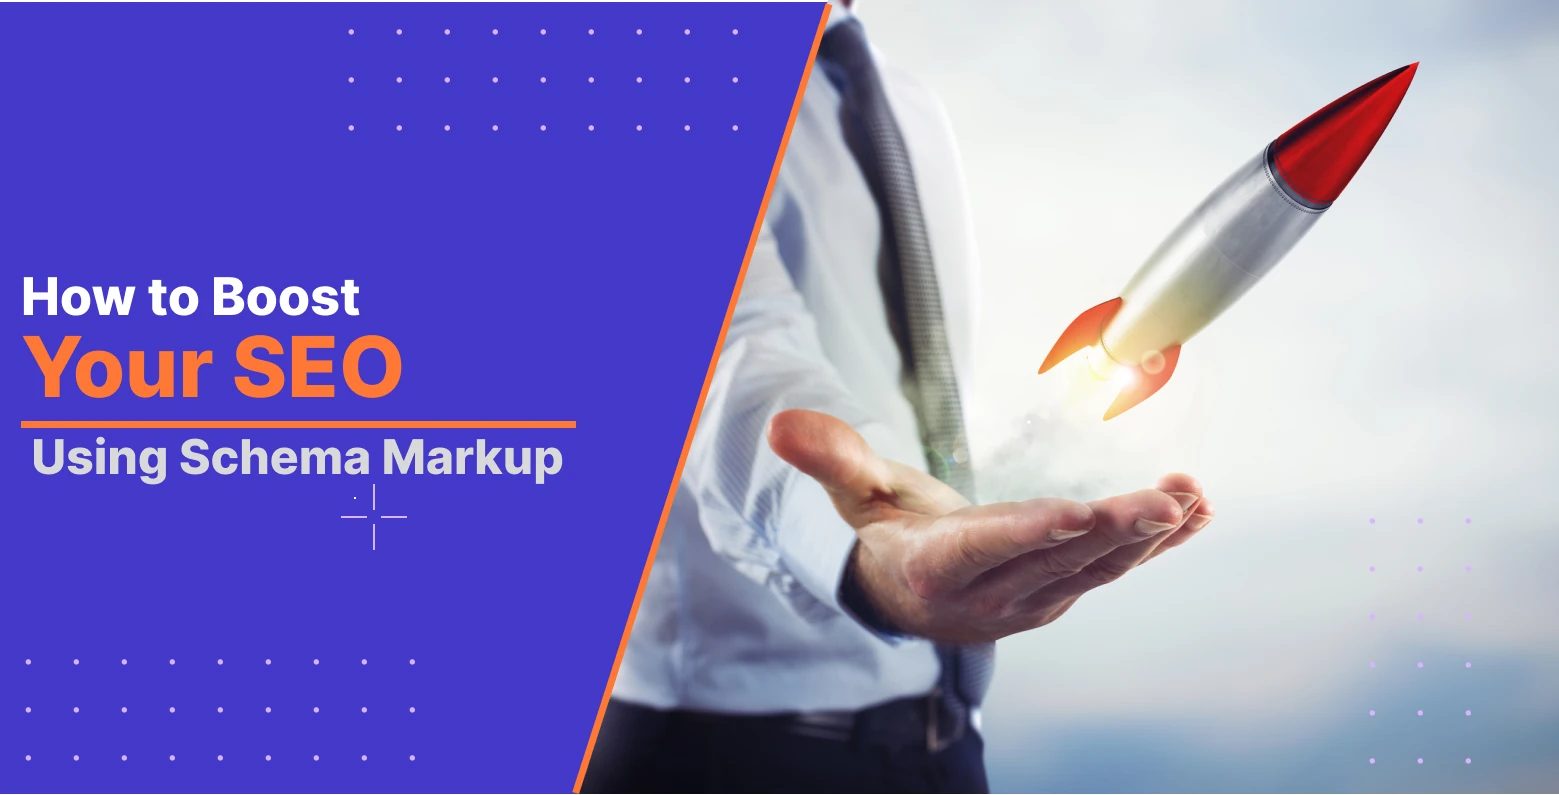 How to Boost Your SEO Using Schema Markup